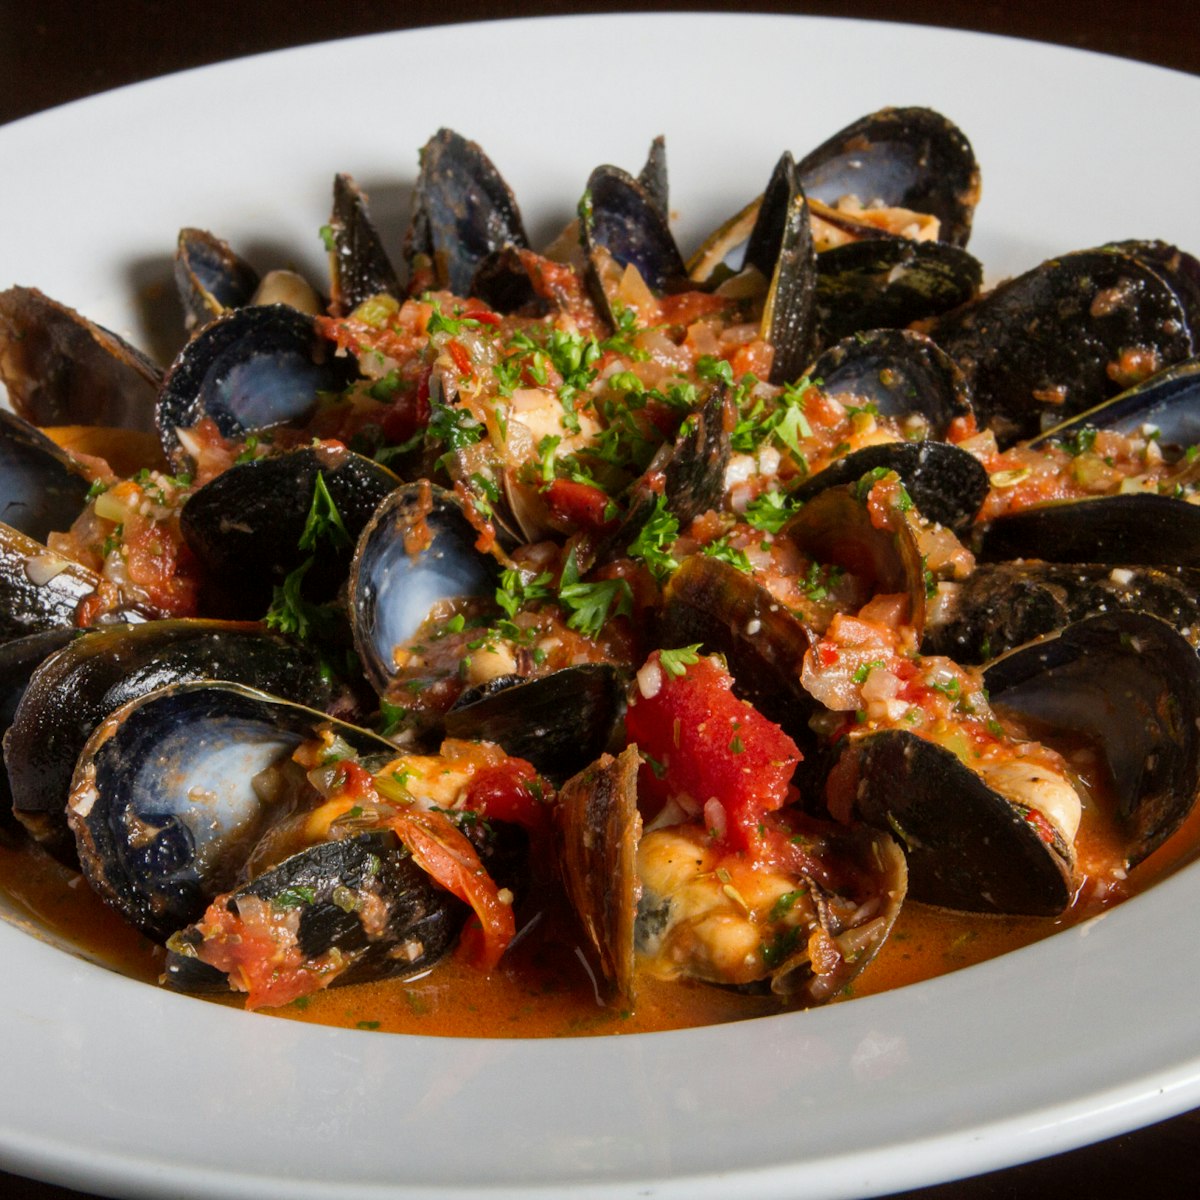 Bowl of Steamed Mussels in Red Sauce. (Photo by: UIG Platinum/UIG via Getty Images)